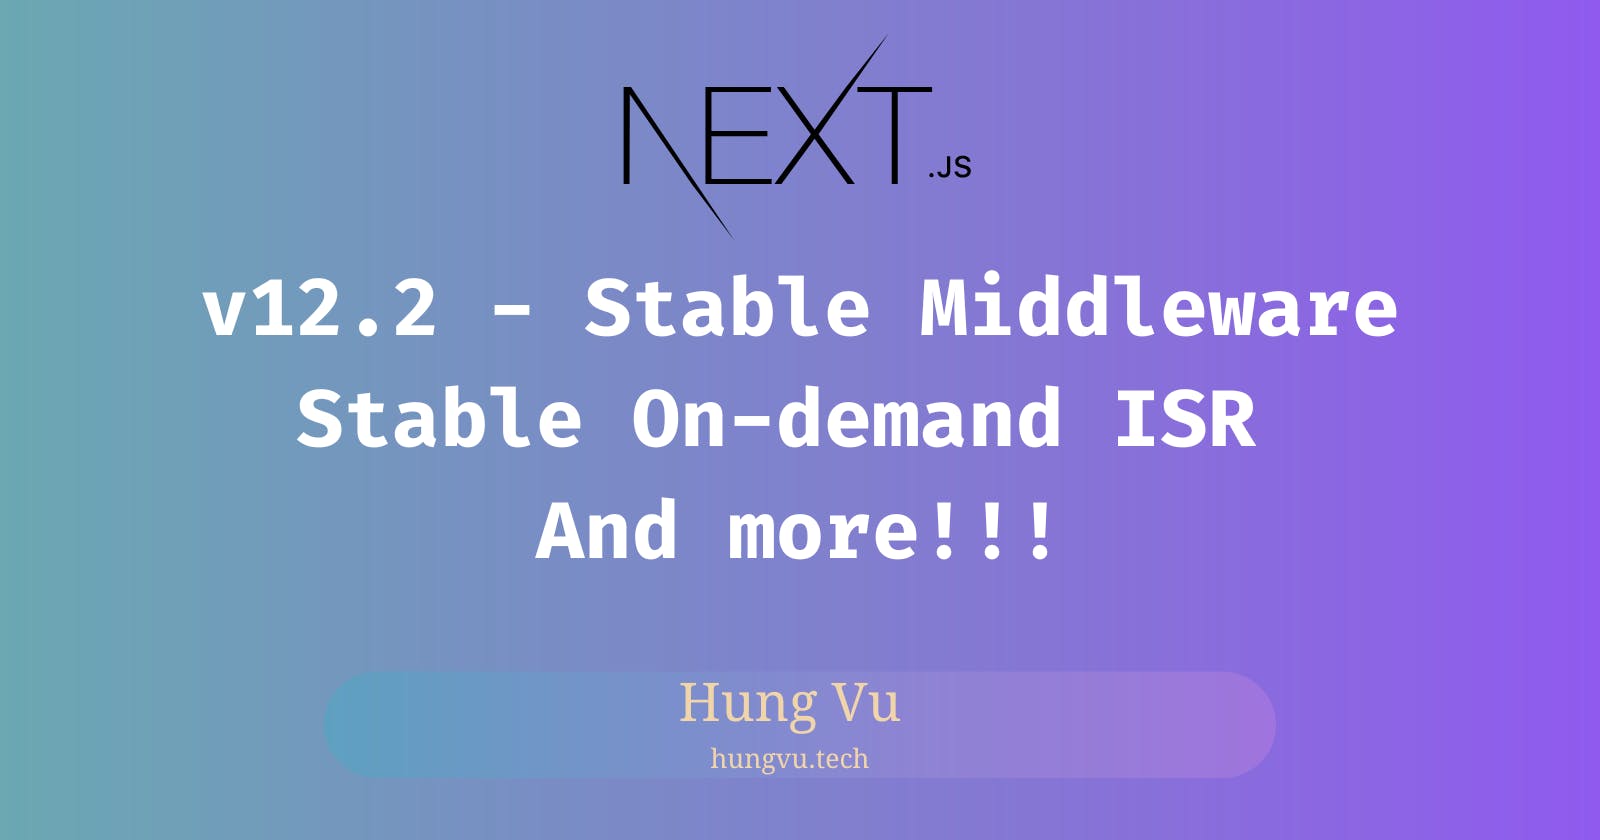 Next.js 12.2 Release: Stable Middleware, On-demand ISR, and more